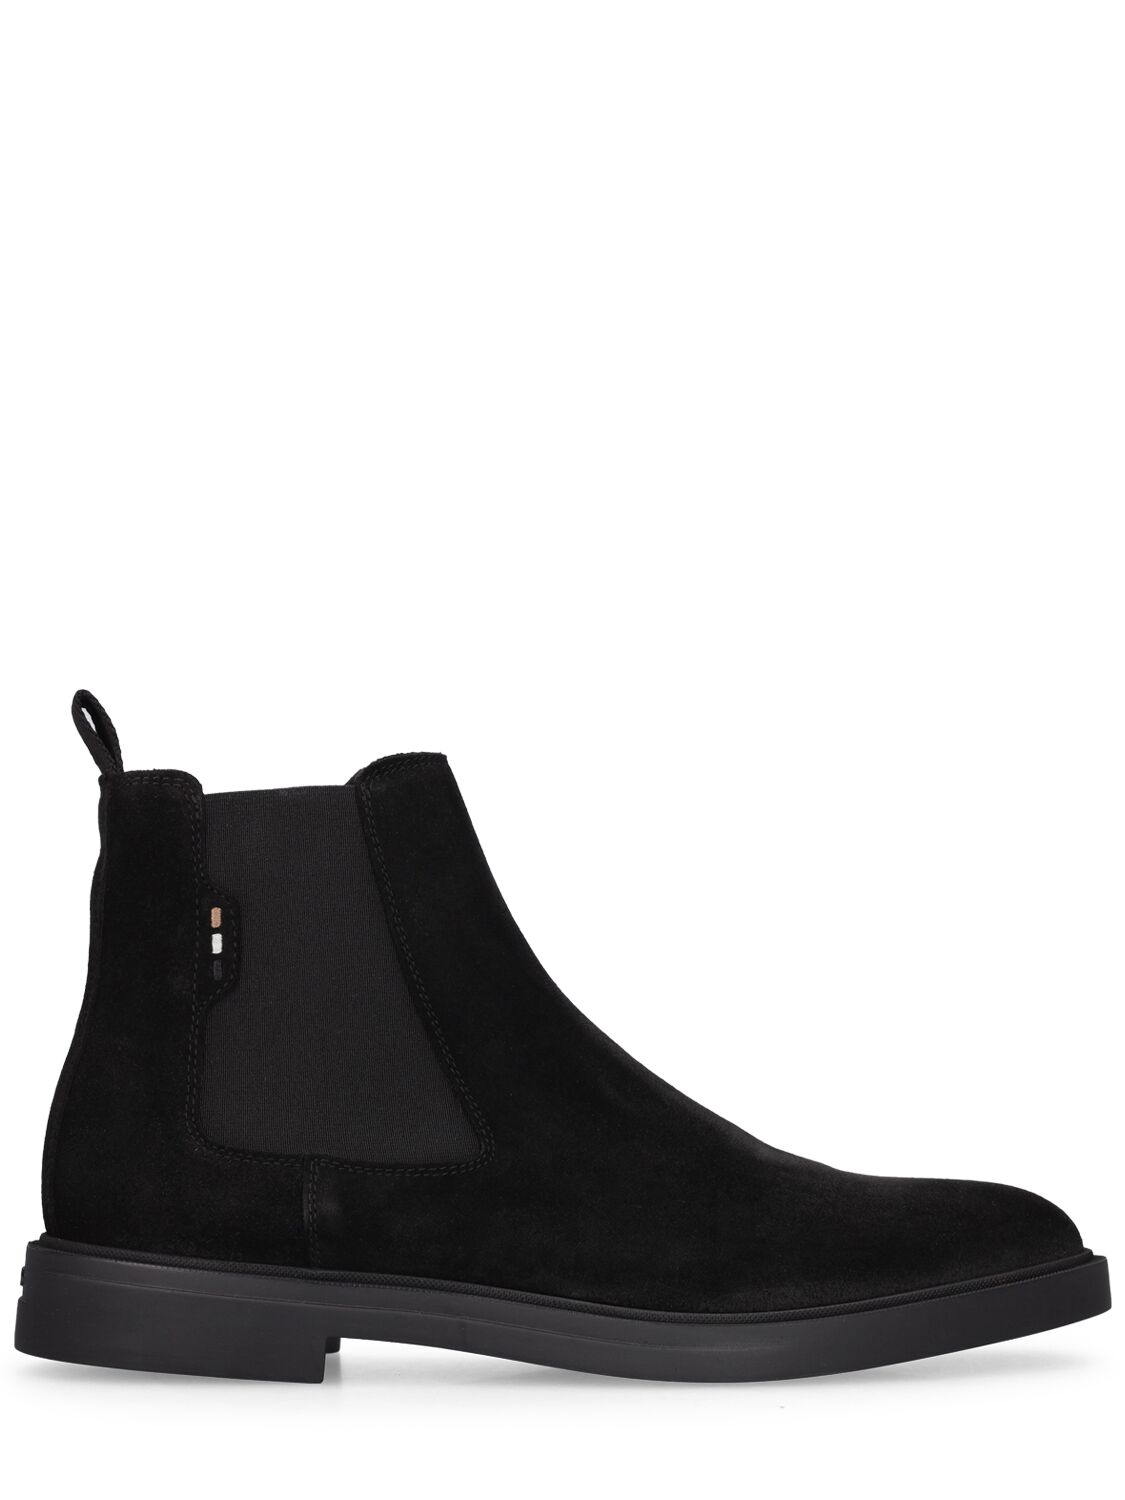 HUGO BOSS CALEV SUEDE CHELSEA BOOTS